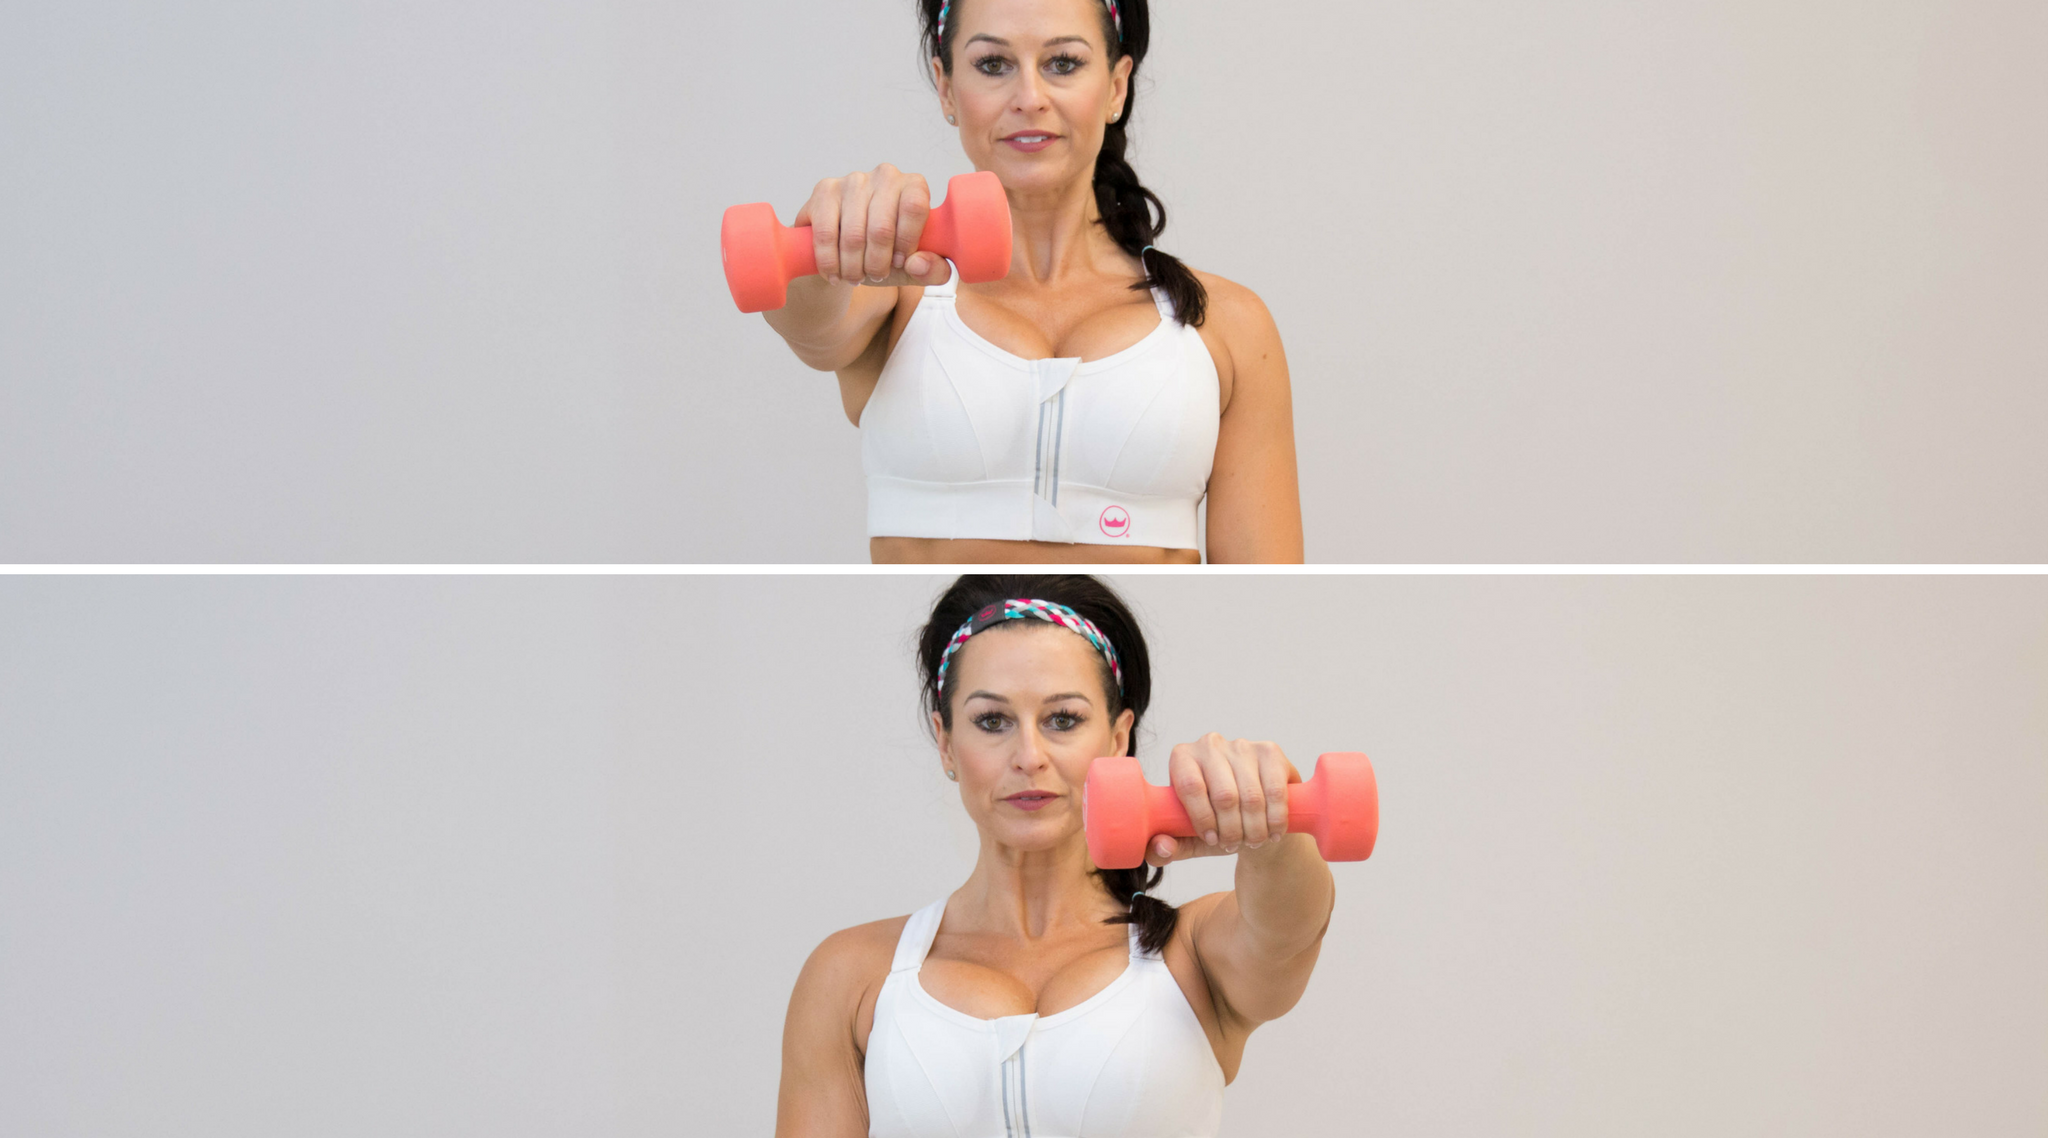 Sculpted shoulders can make your waist appear smaller, your hips more narrow and your body appear more proportionate overall. So to build those sexy shoulder muscles, grab a pair of dumbbells and get ready to do some fat-burning exercises that are guaranteed to sculpt those shoulders in no time! This simple shoulder workout for women can be done at home or use it as part of your routine for the gym. | #Shefit At Home Fitness Workouts For The Gym | Upper Body + Toned Arms